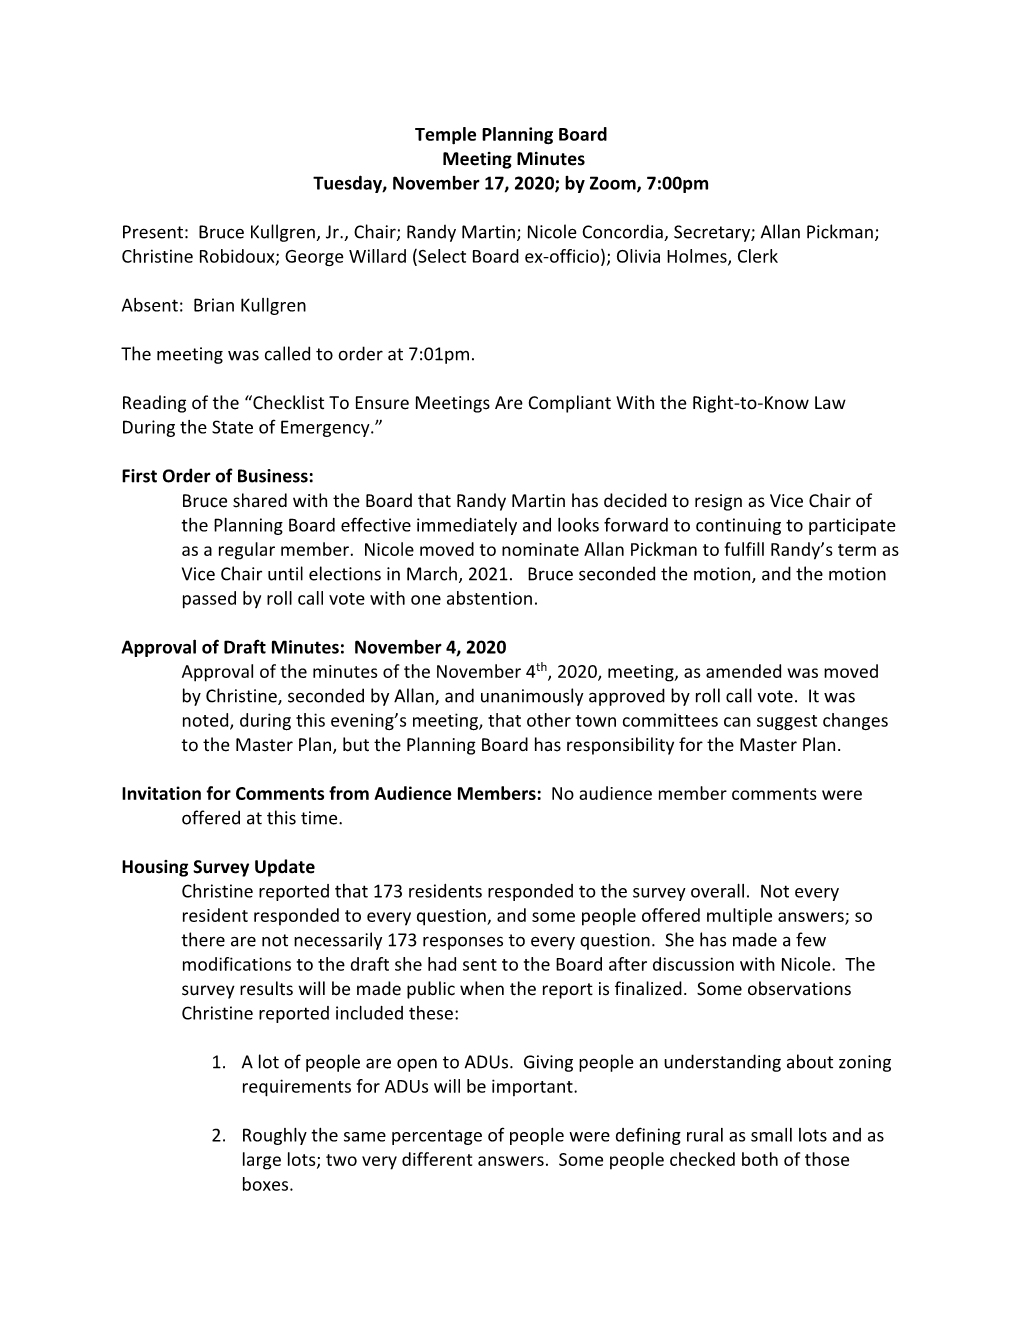 Temple Planning Board Meeting Minutes Tuesday, November 17, 2020; by Zoom, 7:00Pm